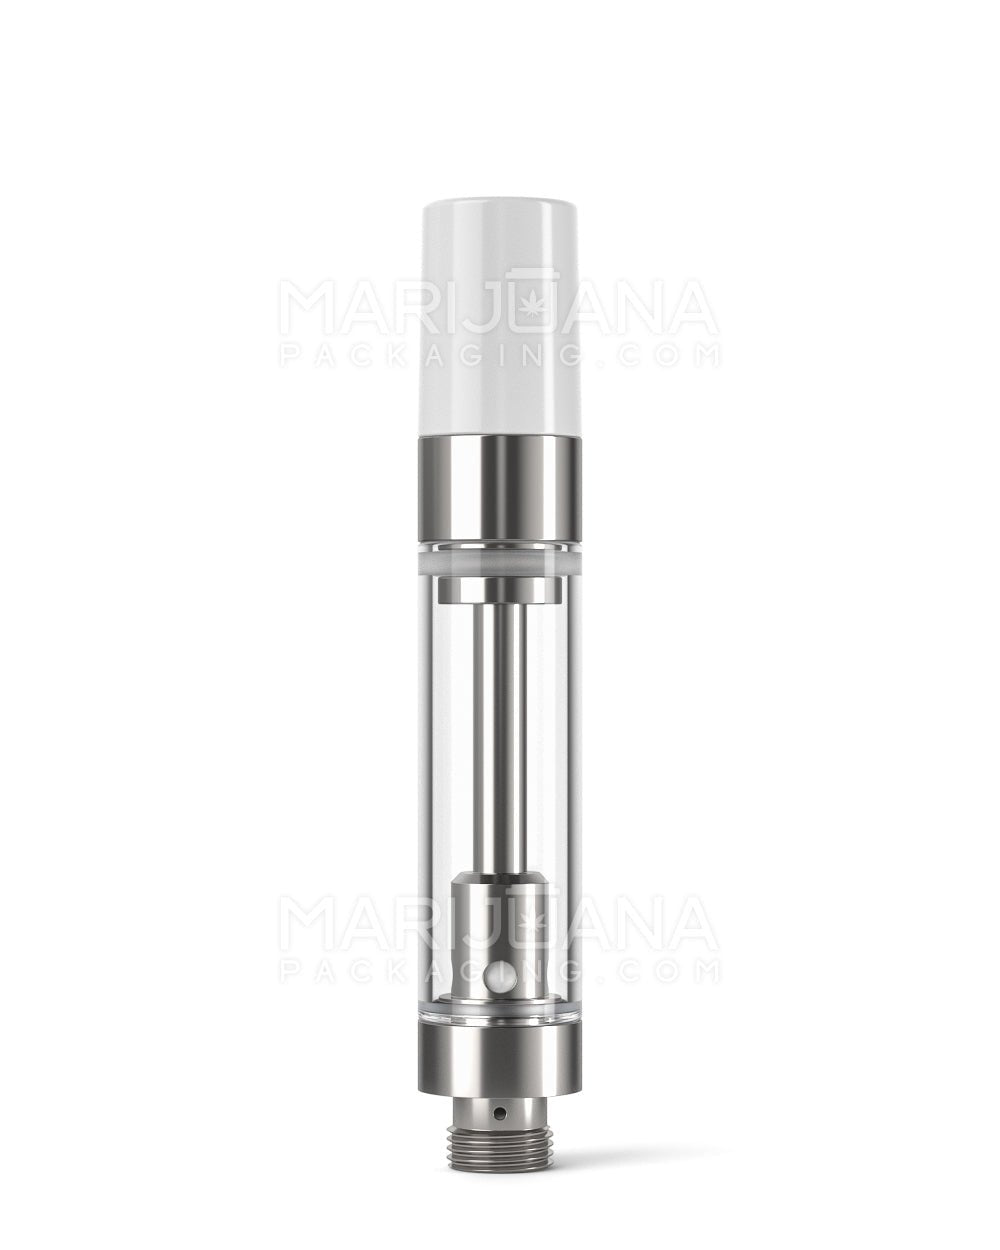 Ceramic Core Glass Vape Cartridge with Round White Plastic Mouthpiece | 1mL - Press On - 100 Count - 1